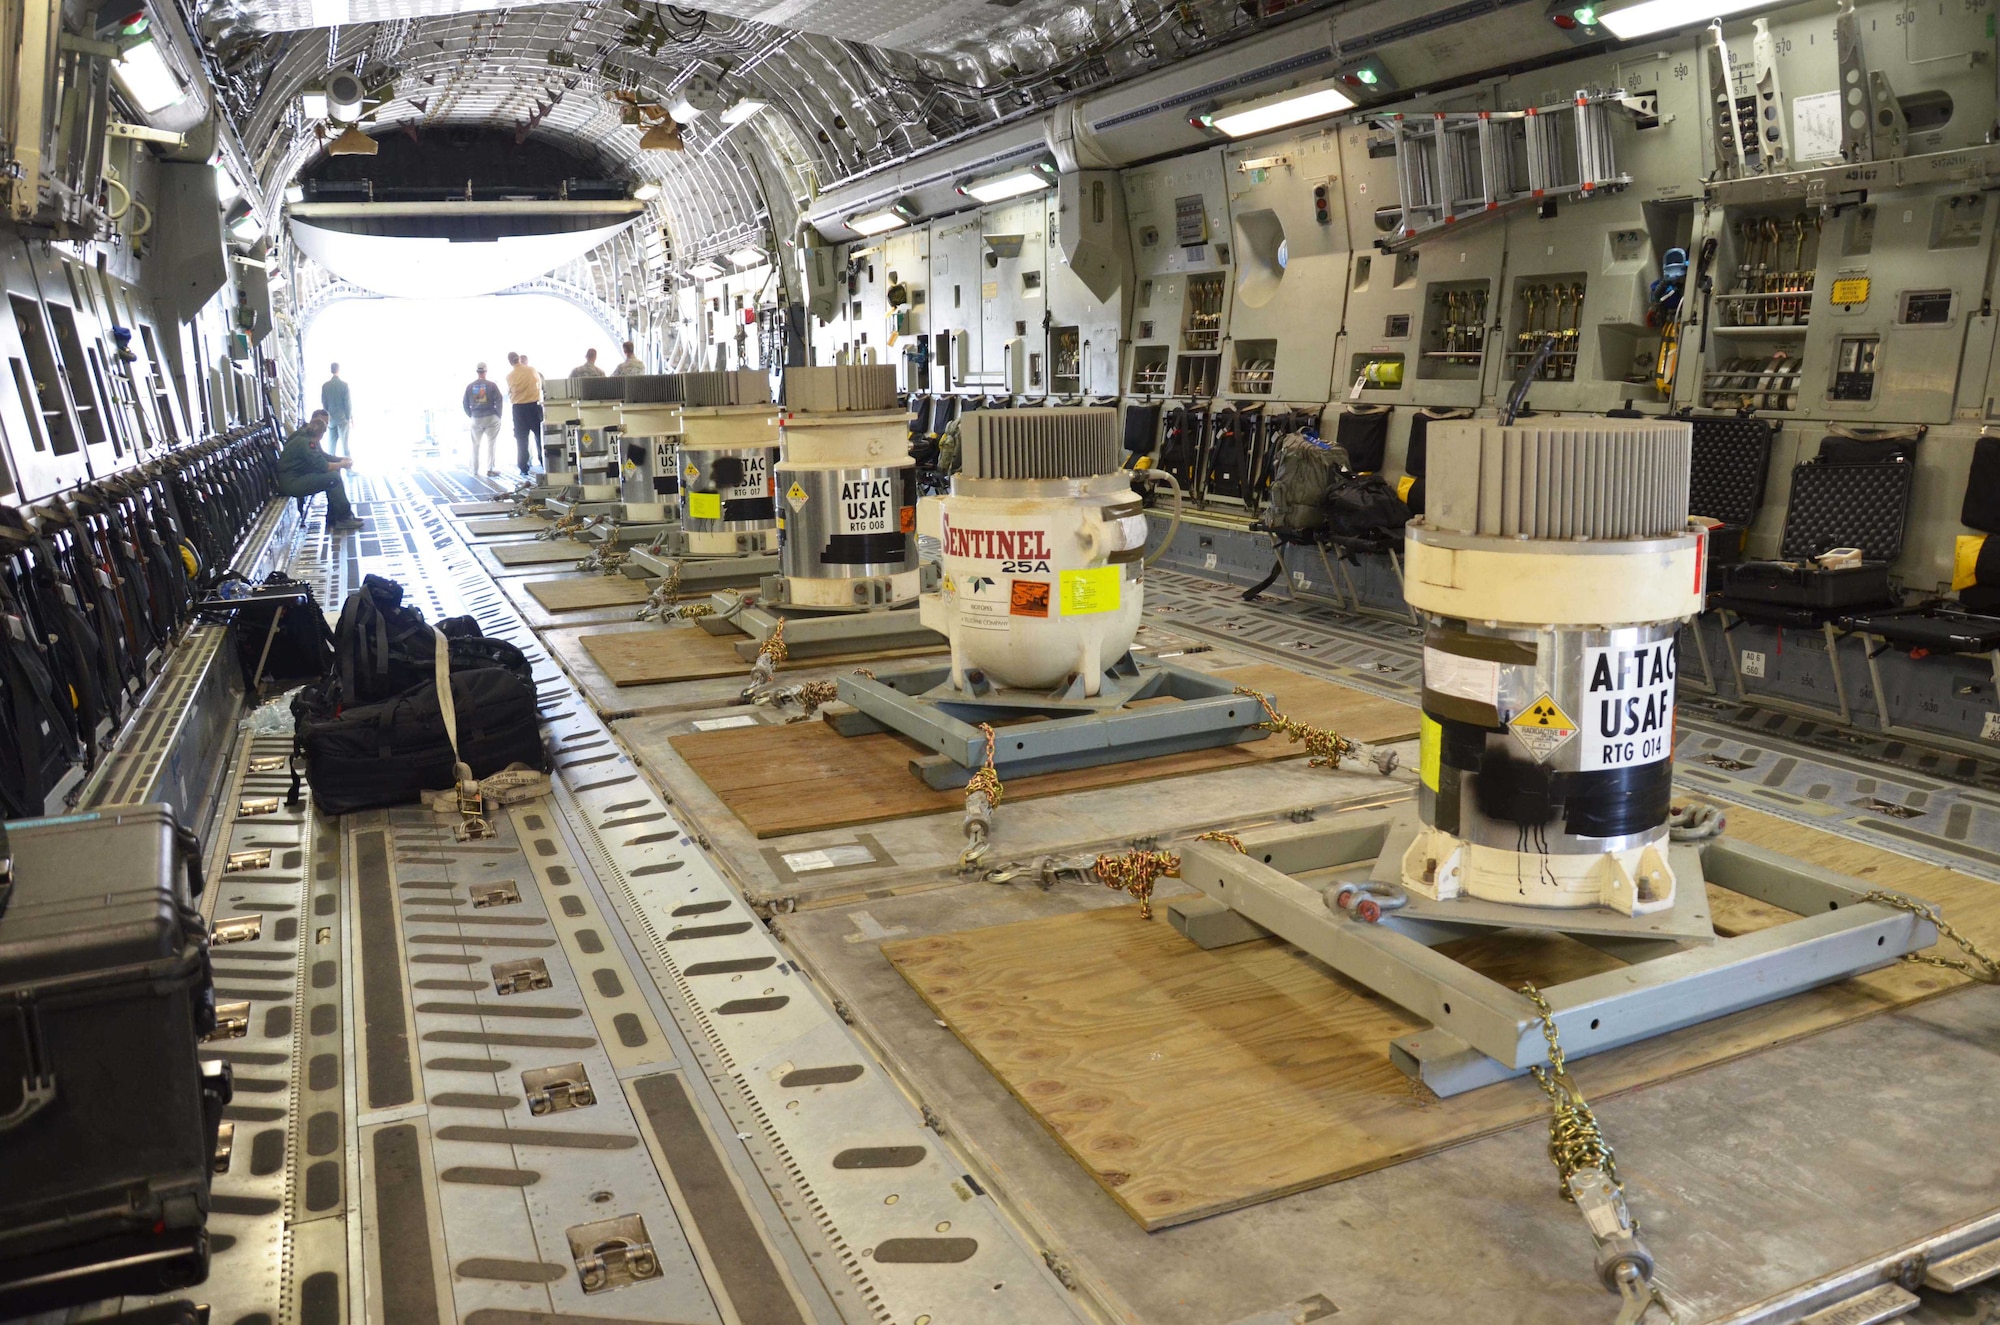 Seven radioisotope thermoelectric generators are lined up aboard an Air Force C-17 Globemaster III after being removed from Burnt Mountain, Alaska, and transported to Creech AFB, Nevada, July 24, 2015, in preparation for permanent disposal at the Nevada National Security Site.  The RTGs, which contain nuclear material, were once used as a power source for the Air Force Technical Applications Center's seismic array, which monitors seismic activity in the region. The RTGs were replaced with a hybrid power source.  (U.S. Air Force photo by Susan A. Romano)